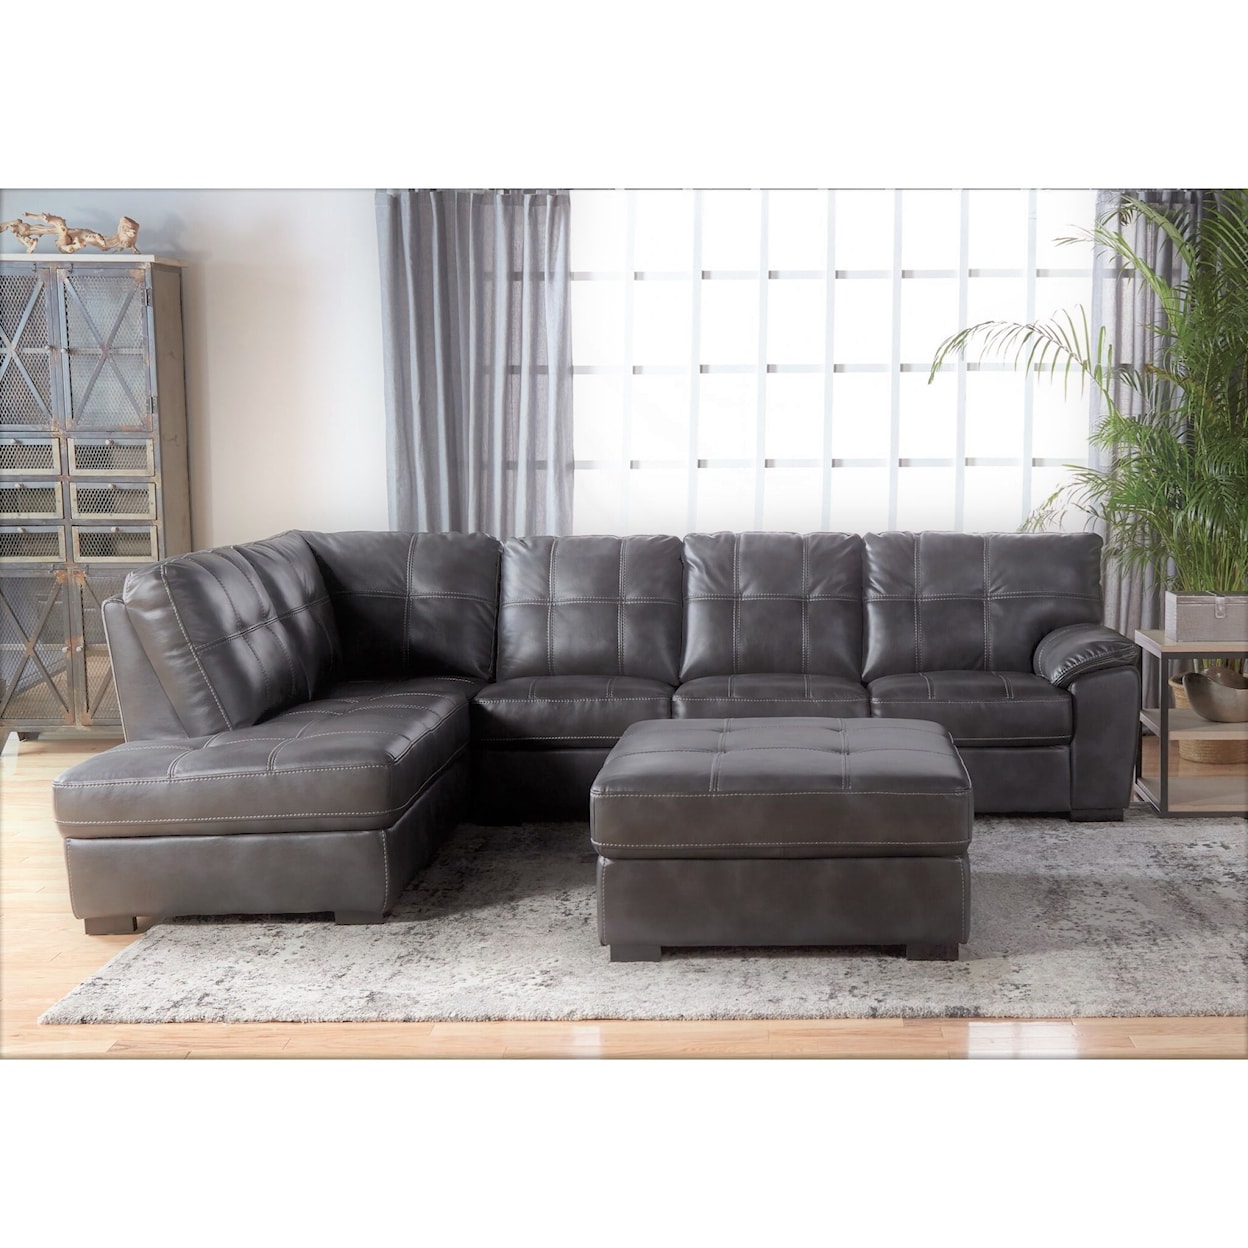 VFM Signature 5312 Tufted Sectional with Bumper Chaise